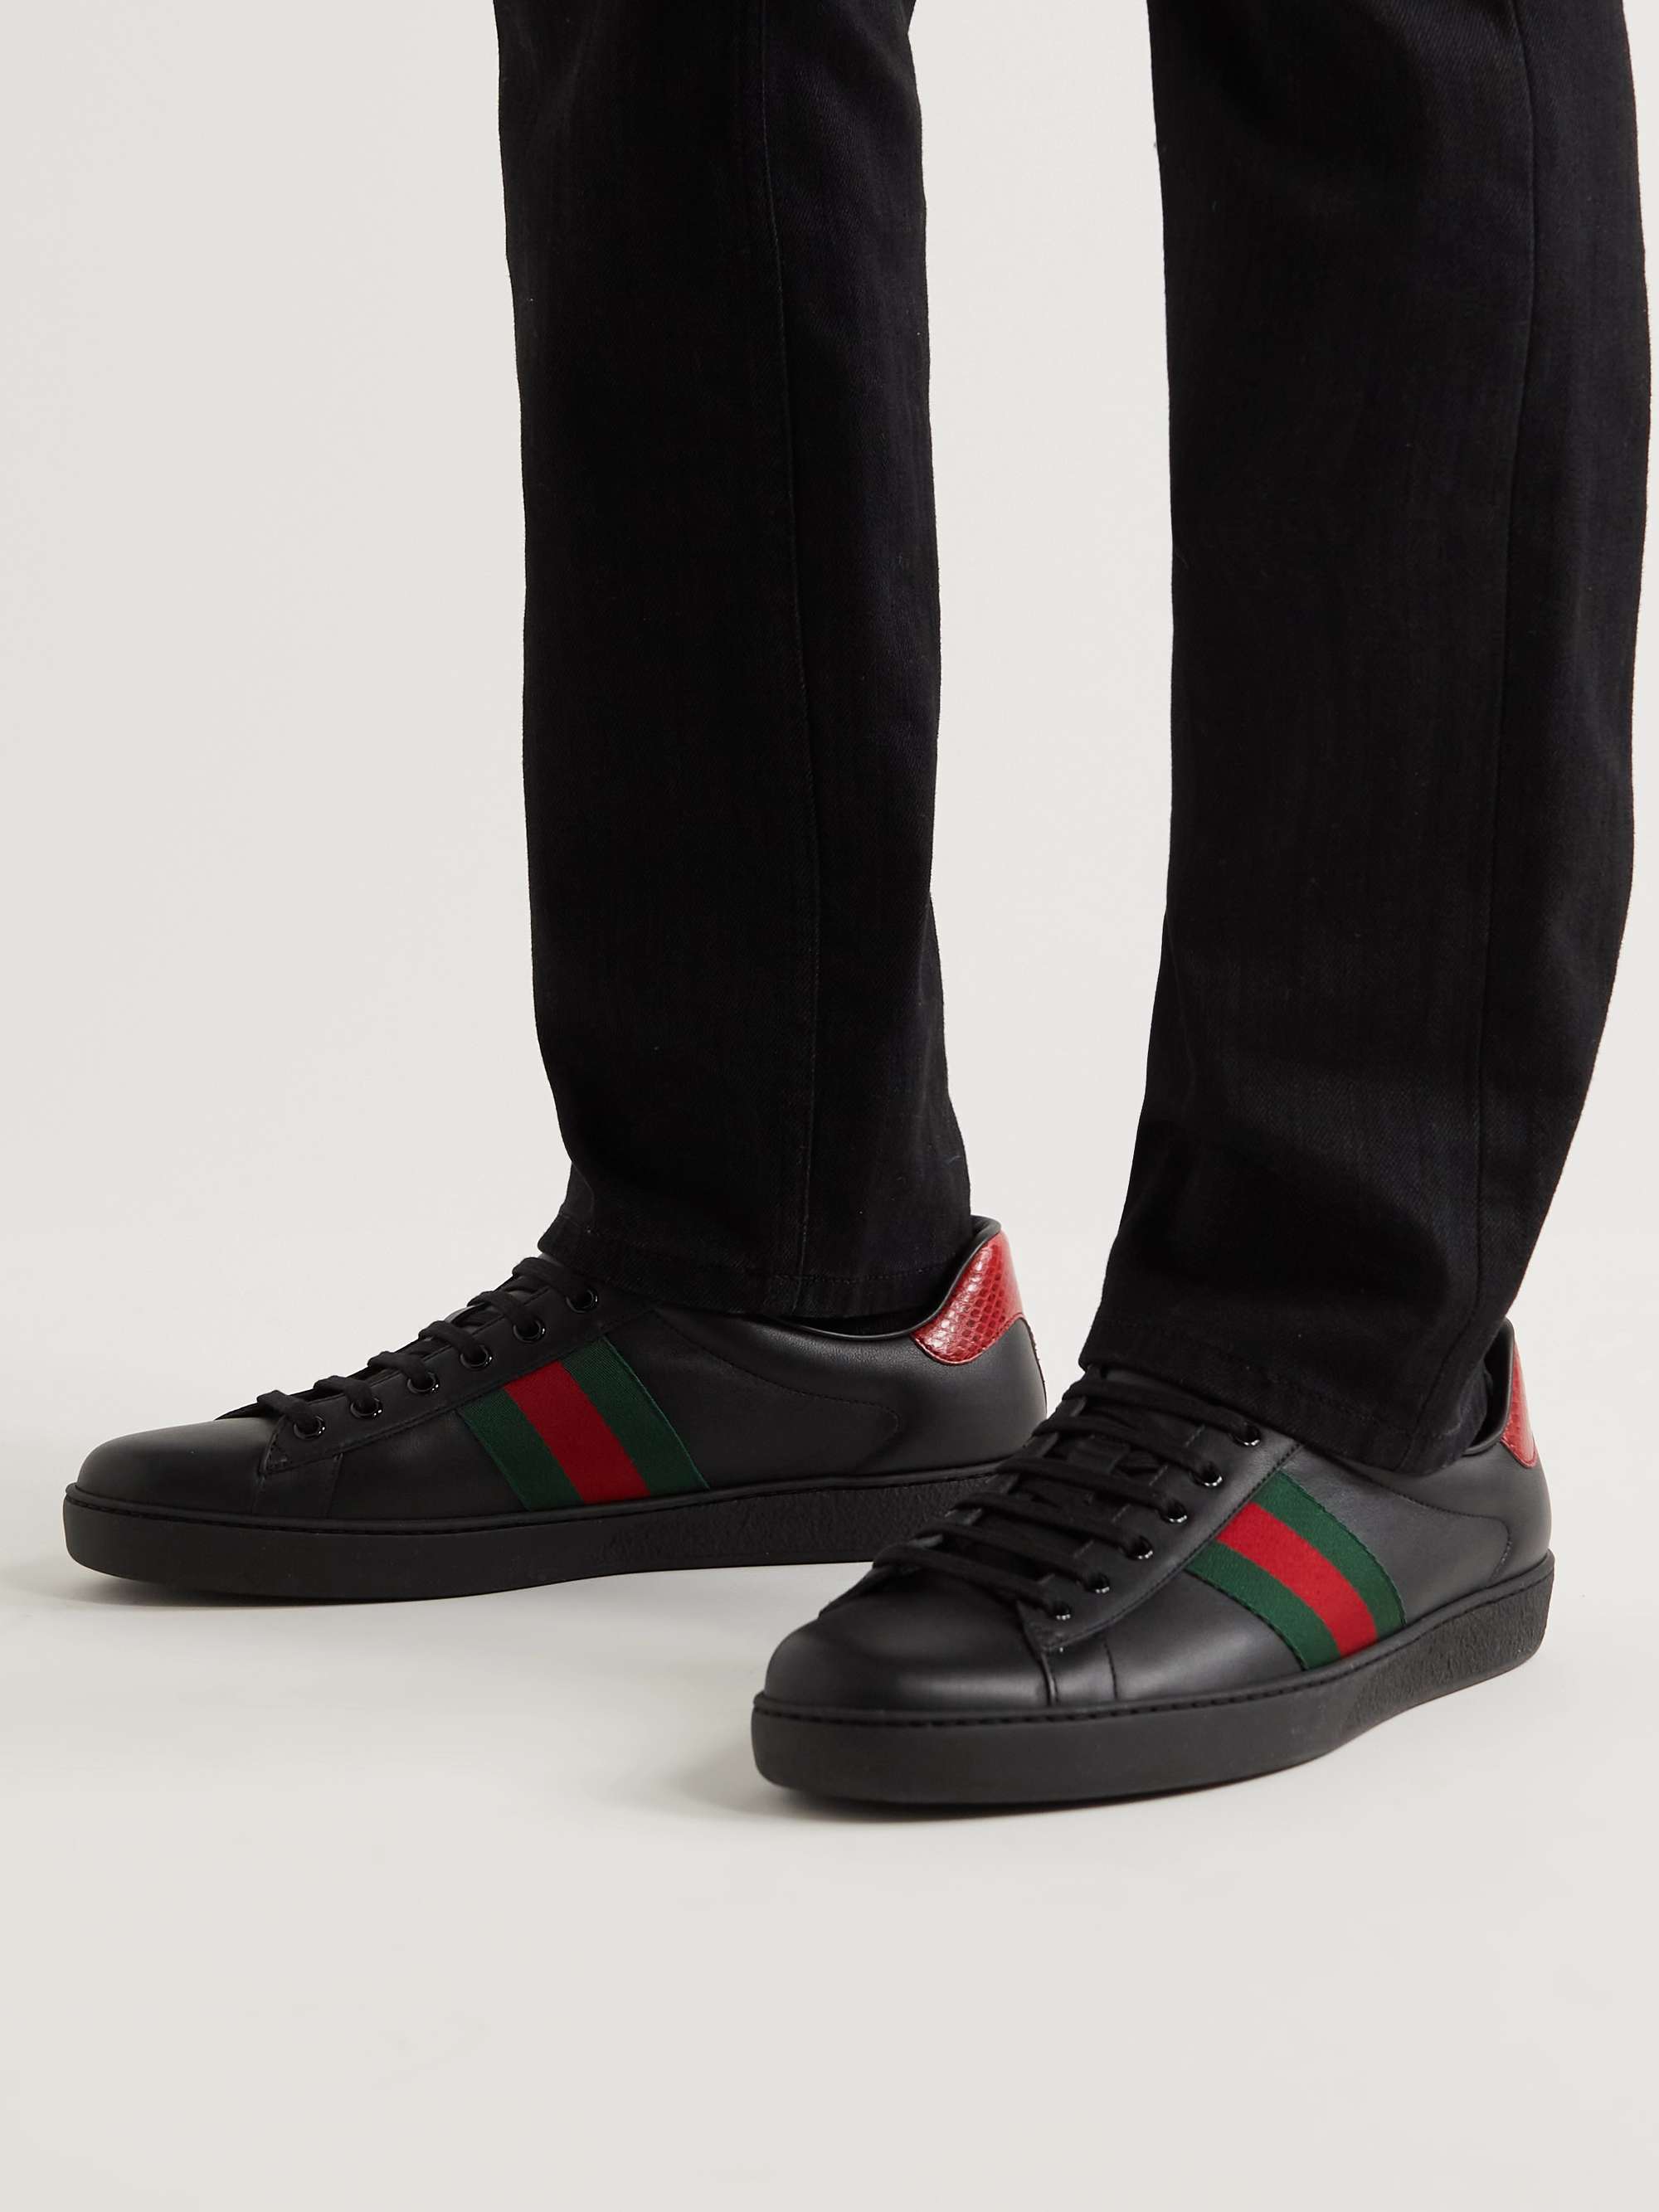 GUCCI Ace Faux Watersnake-Trimmed Leather Sneakers | MR PORTER